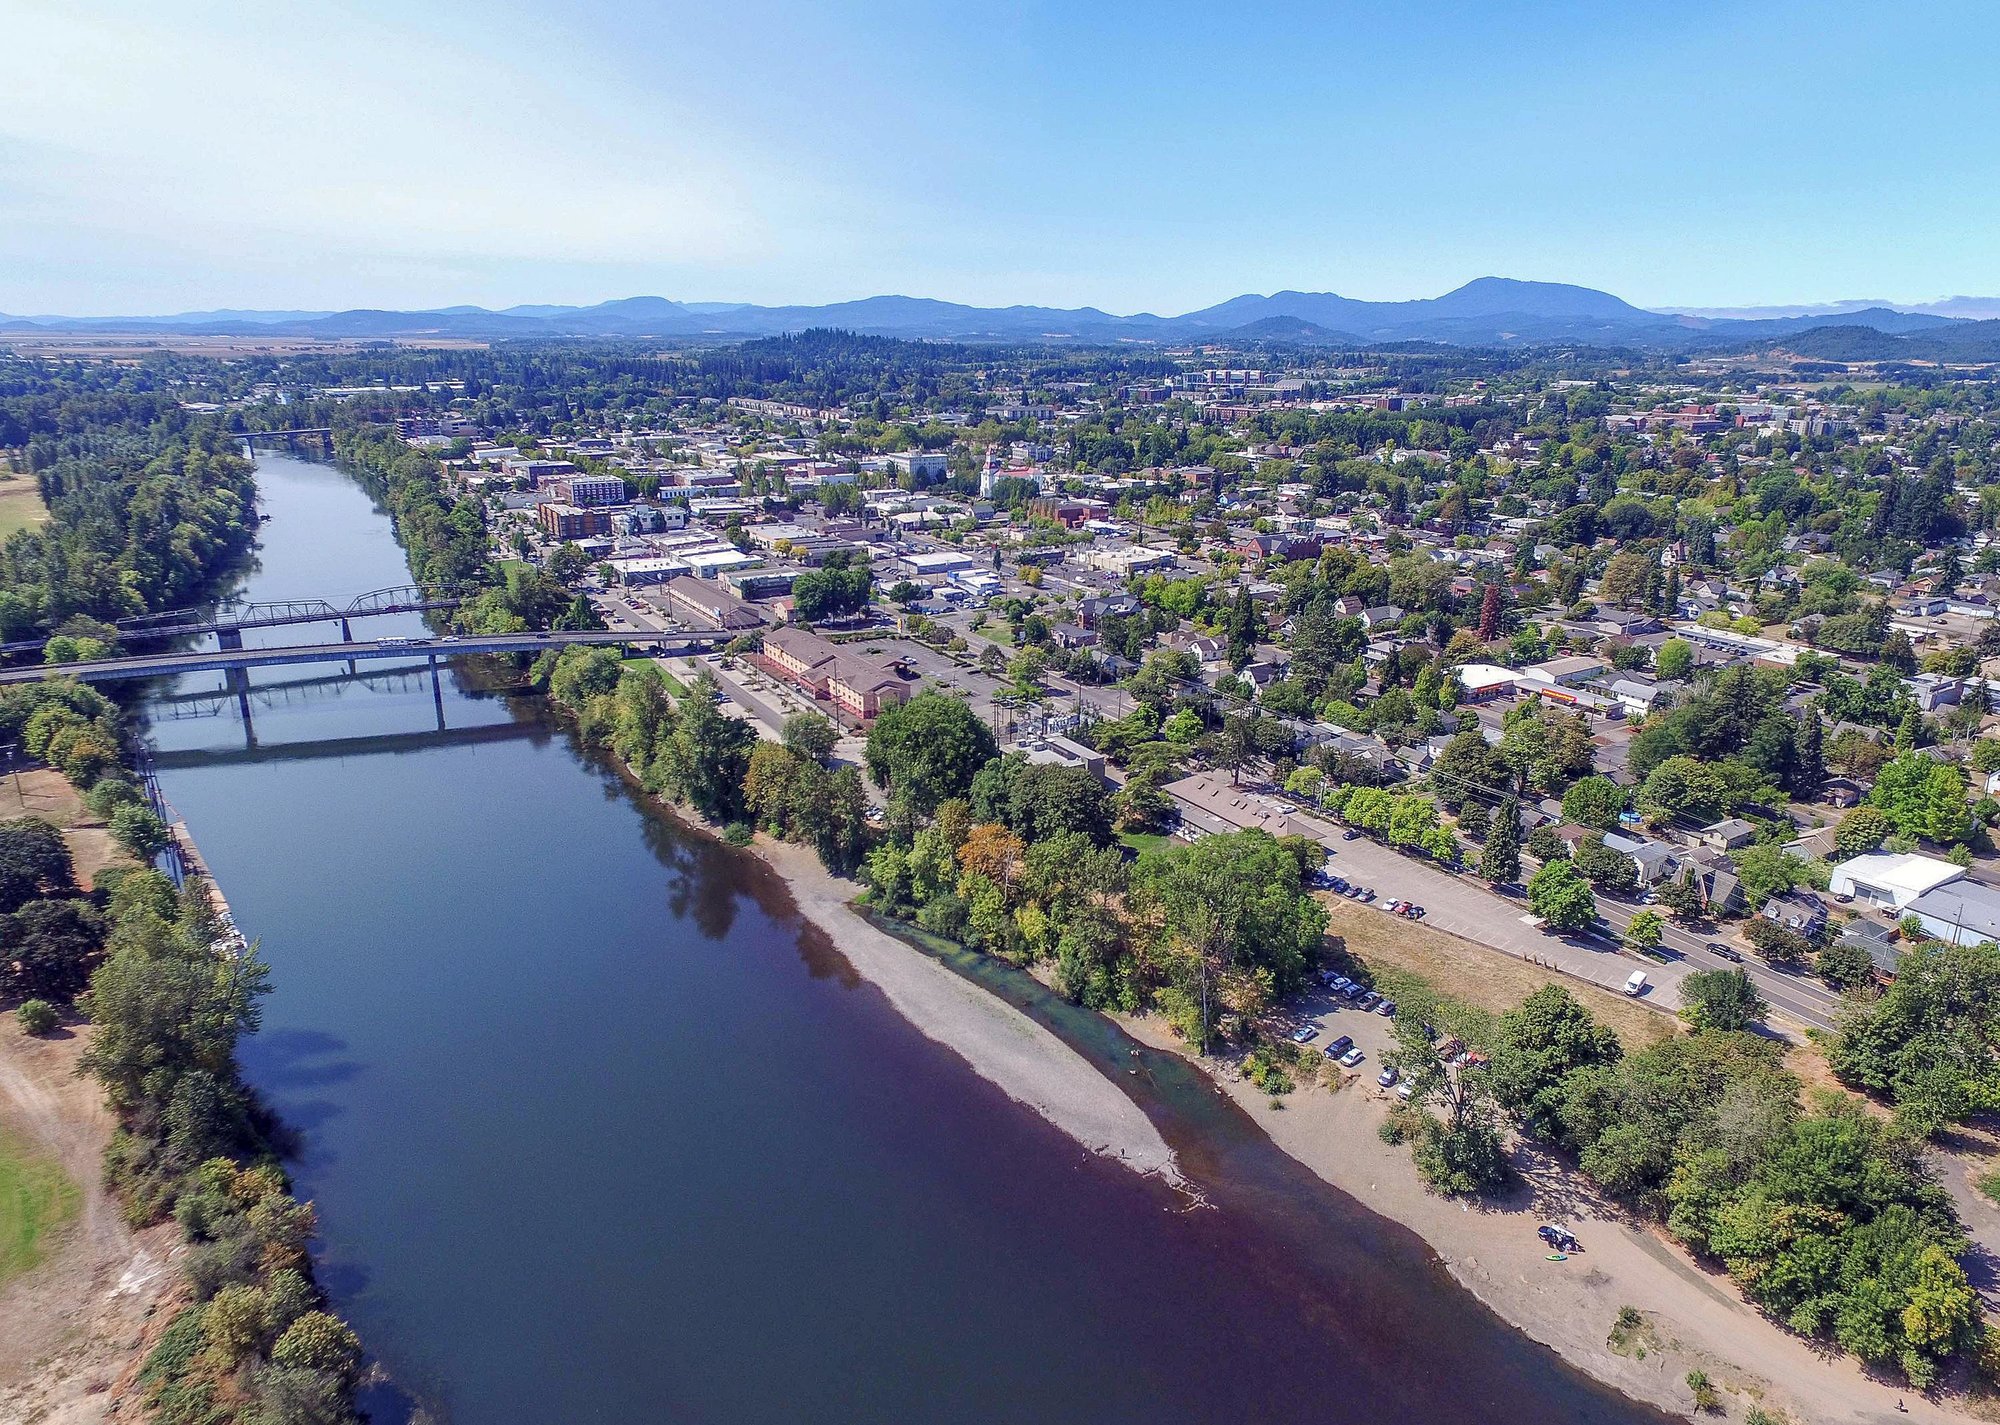 “Corvallis, Oregon aerial shot featuring two bridges” - Source: cpaulfell // Shutterstock